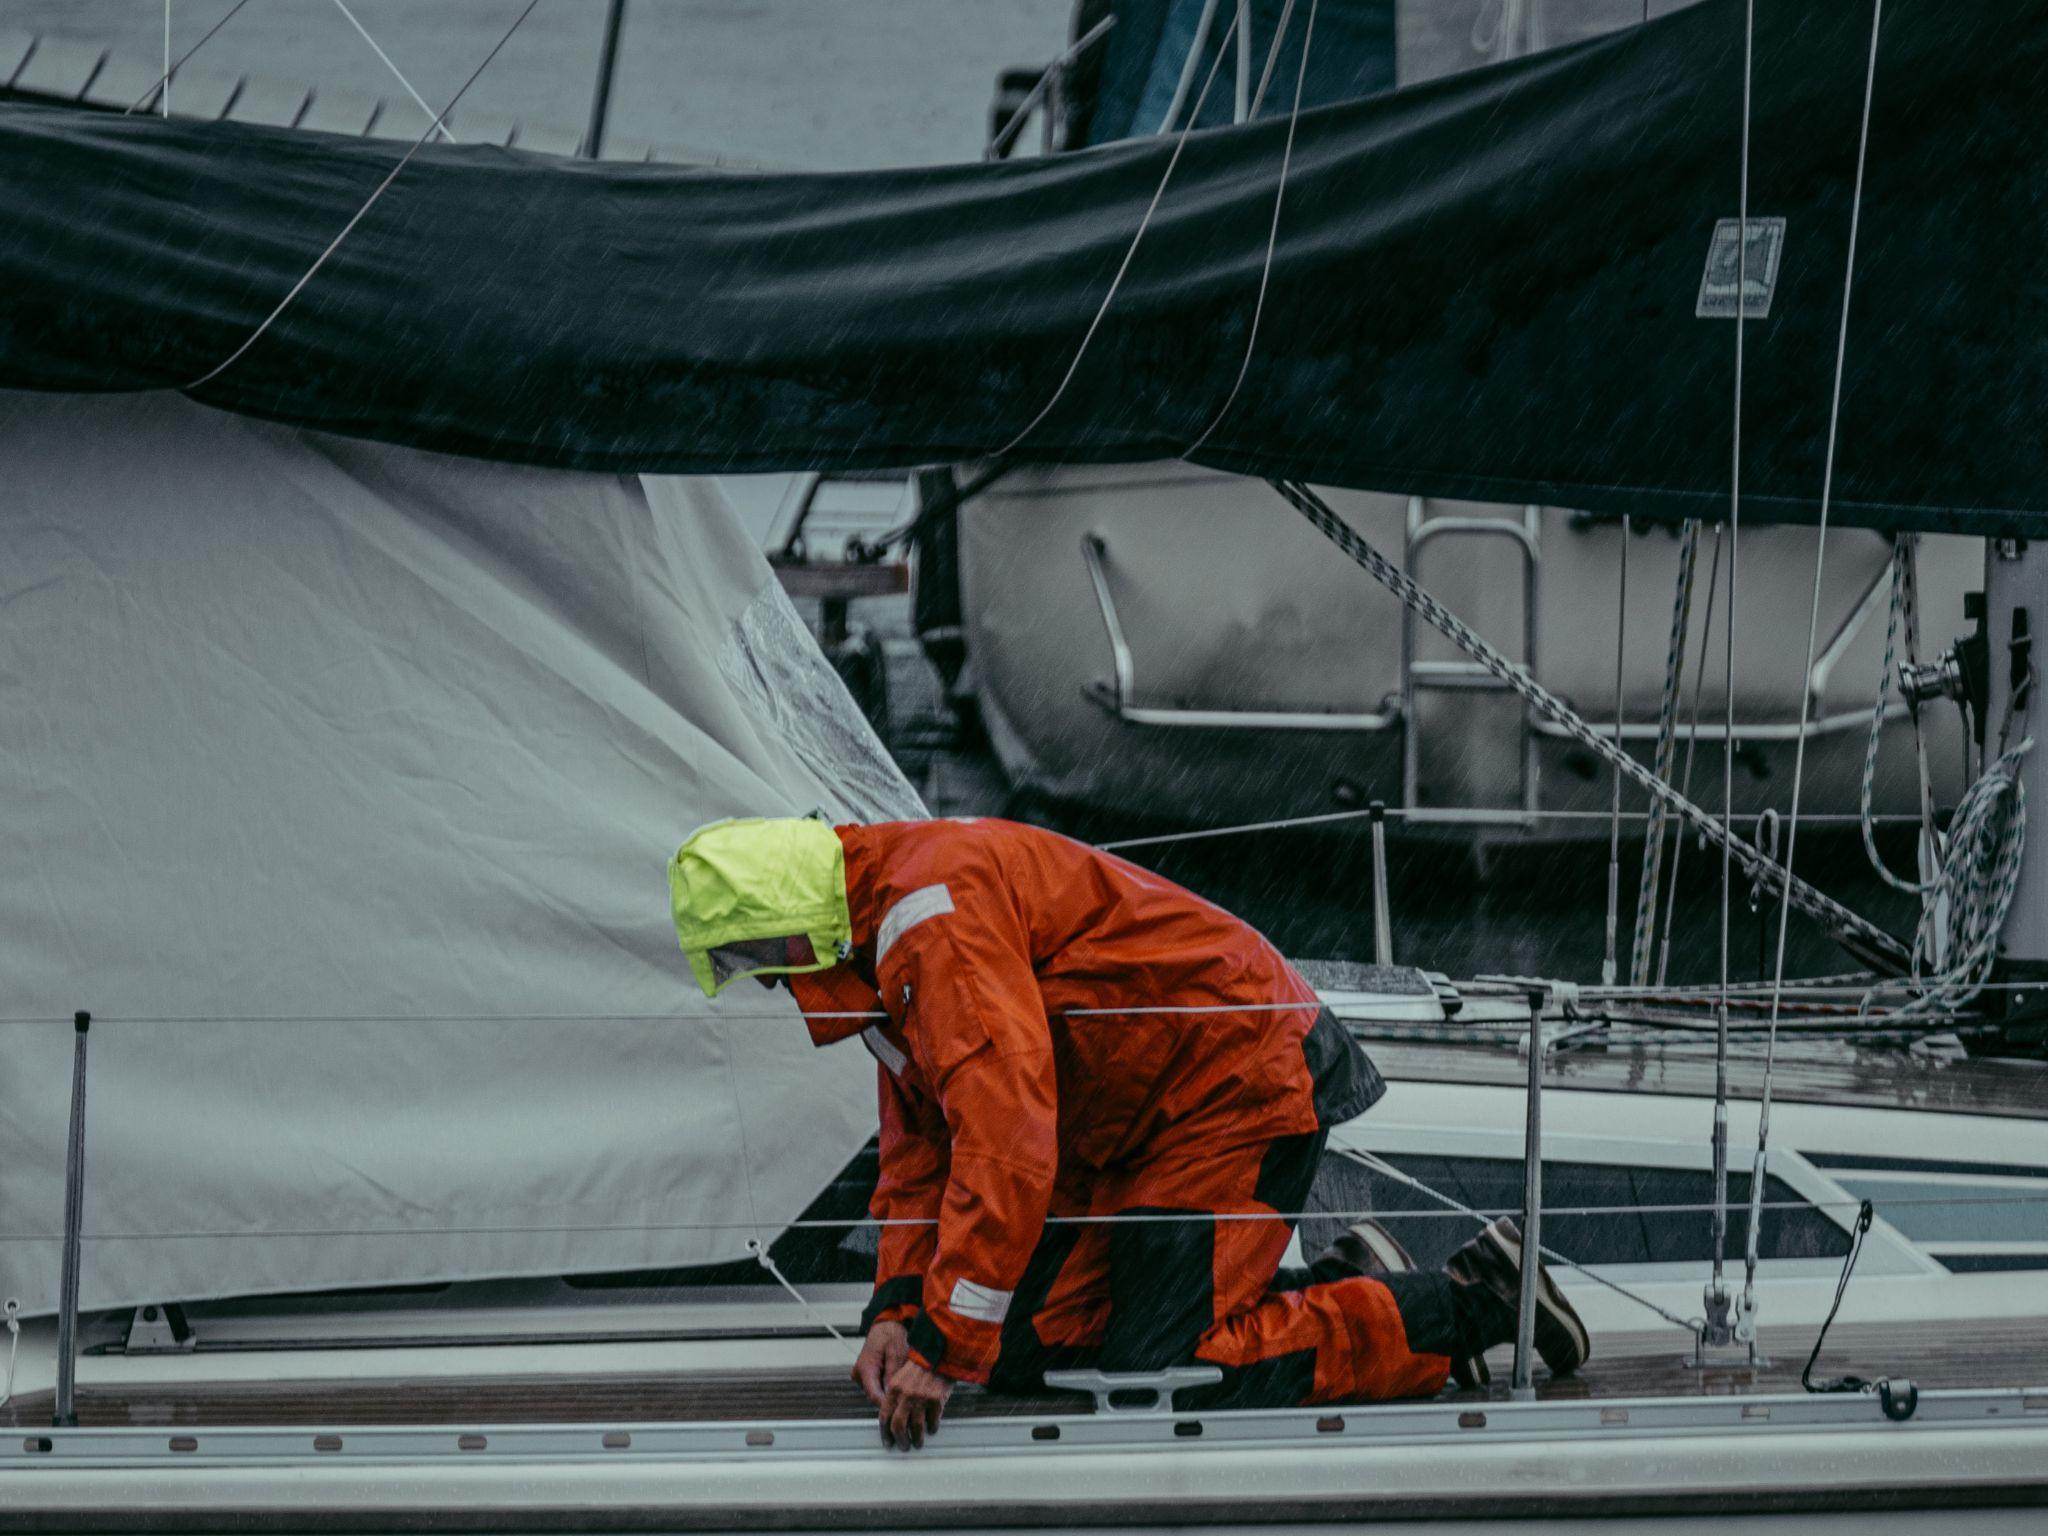 A man in safety gear working on a oil rig